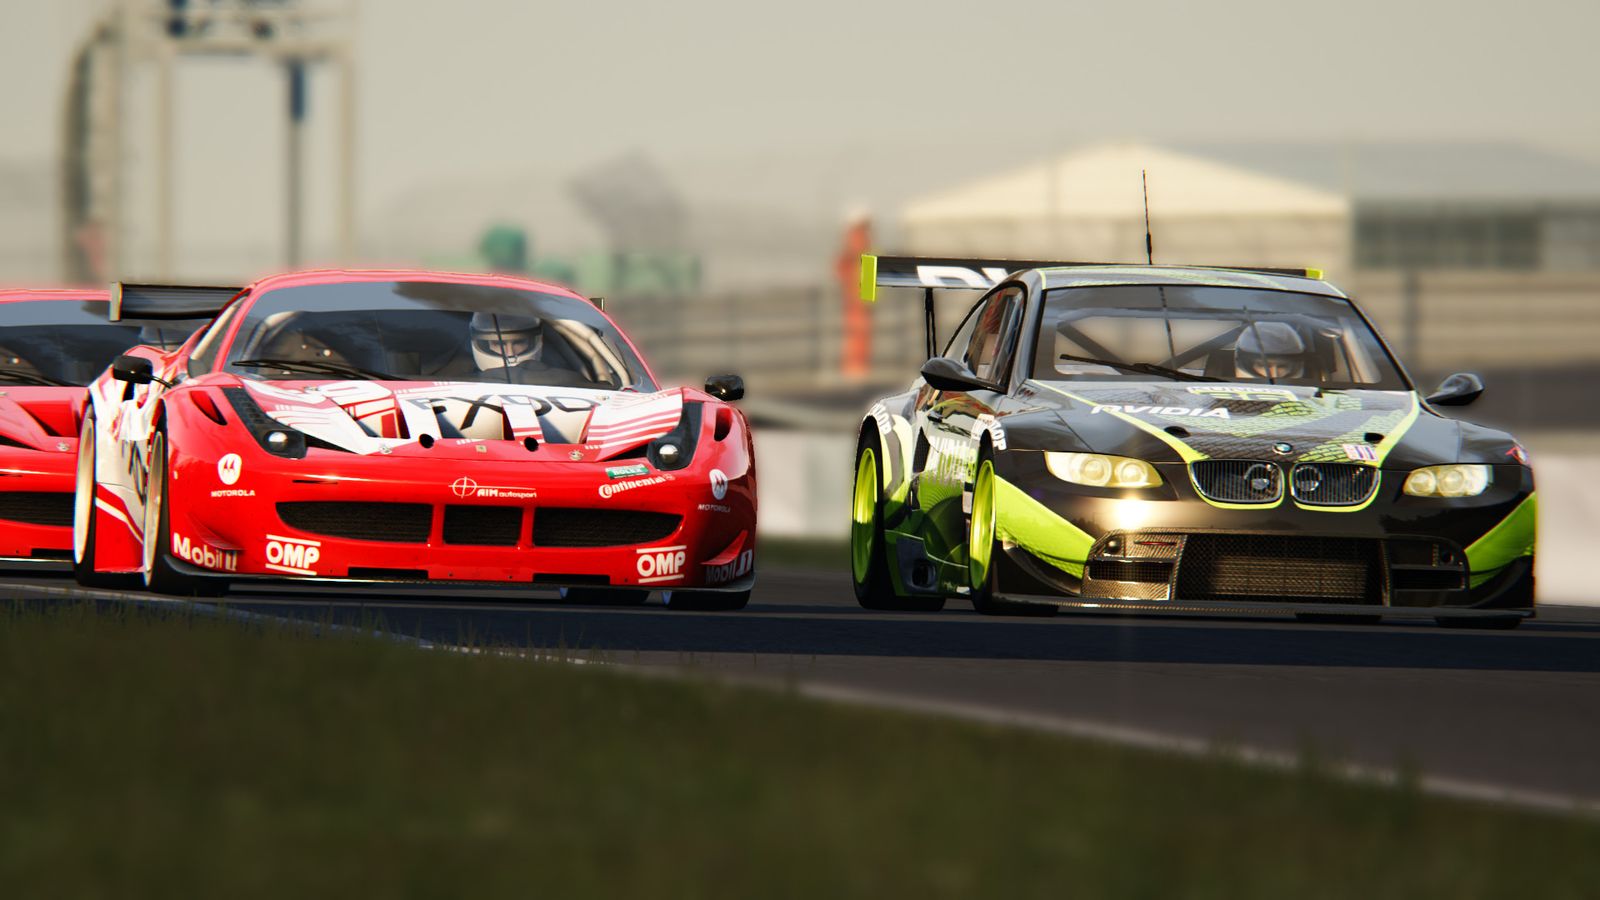 Assetto Corsa 2 Suffers a Delay, Early Access Launch Confirmed